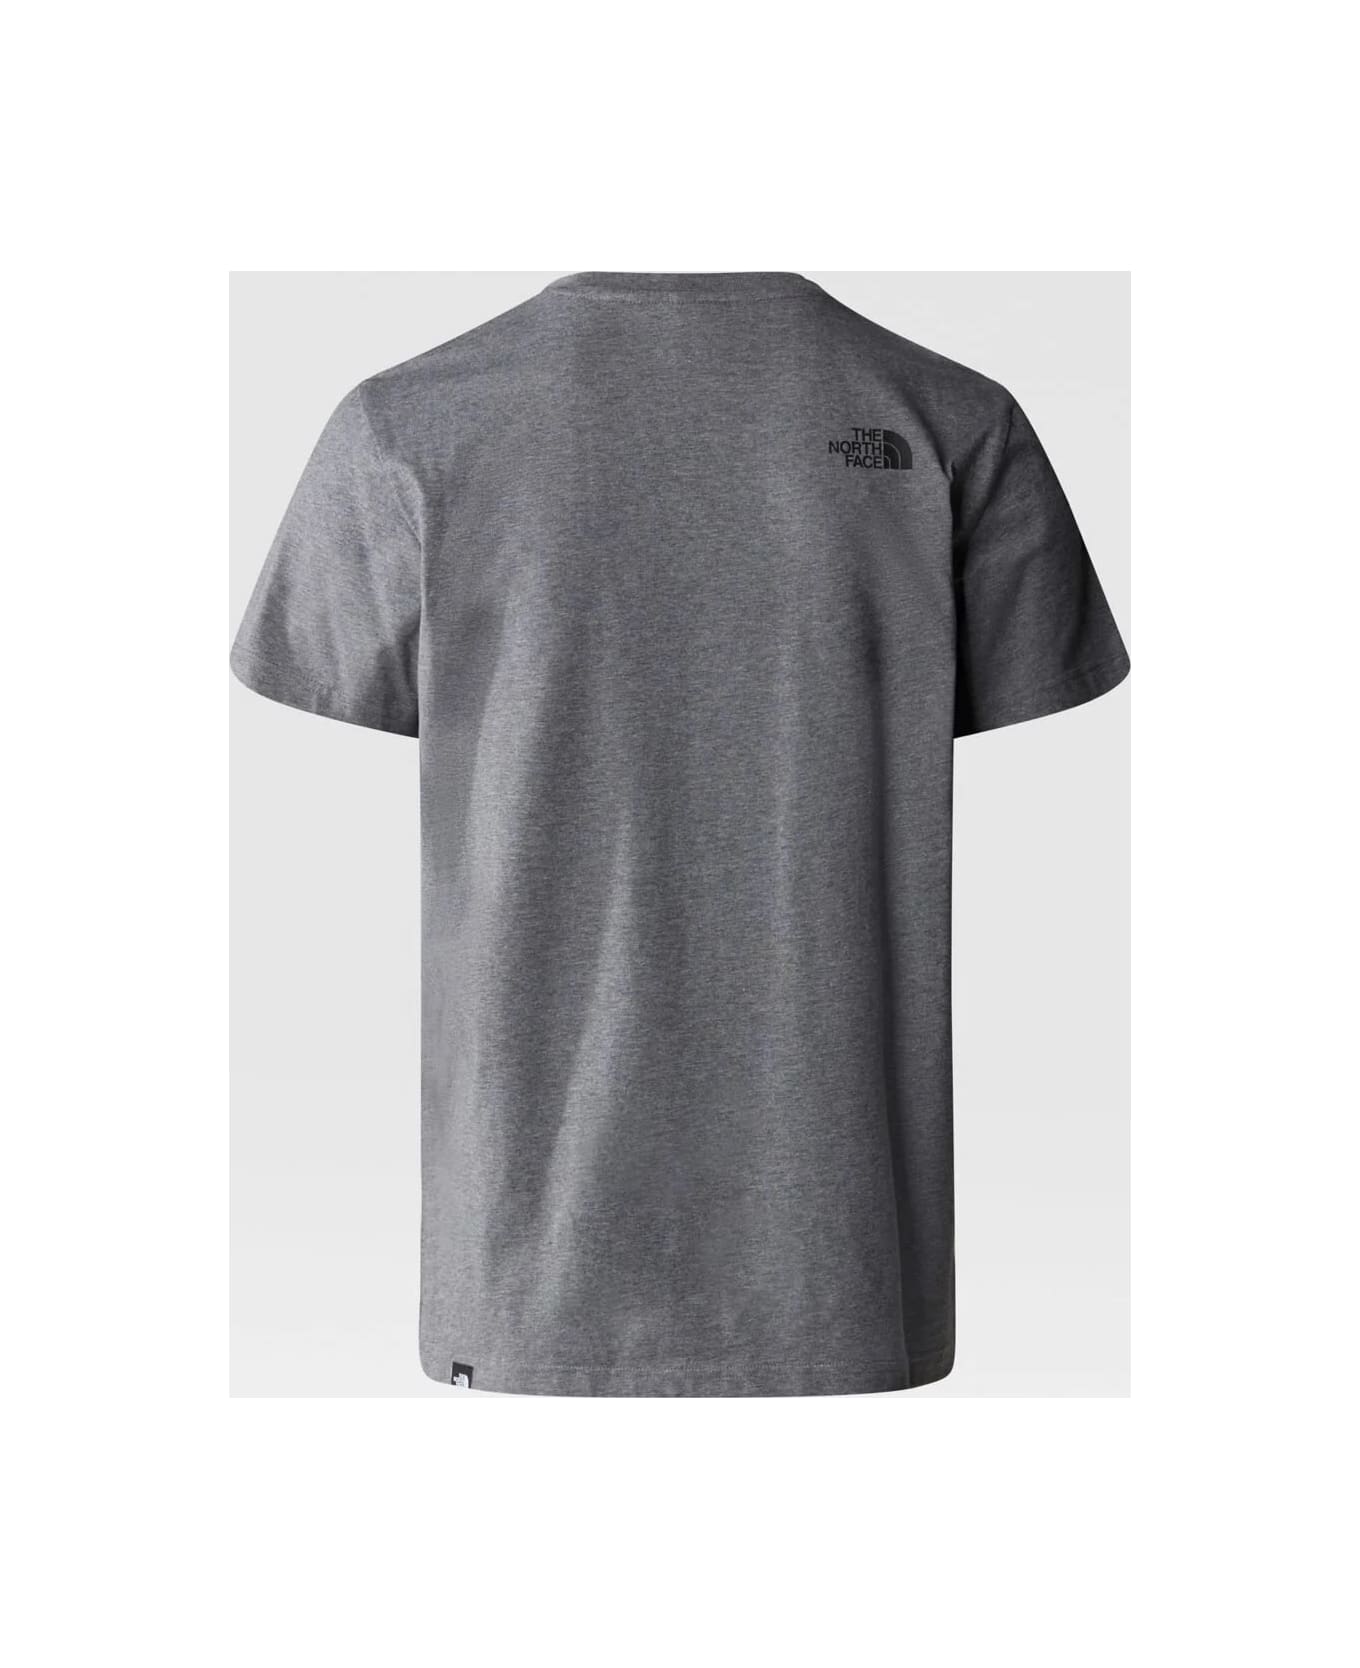 The North Face M S/s Simple Dome Tee - Tnf Medium Grey Heather